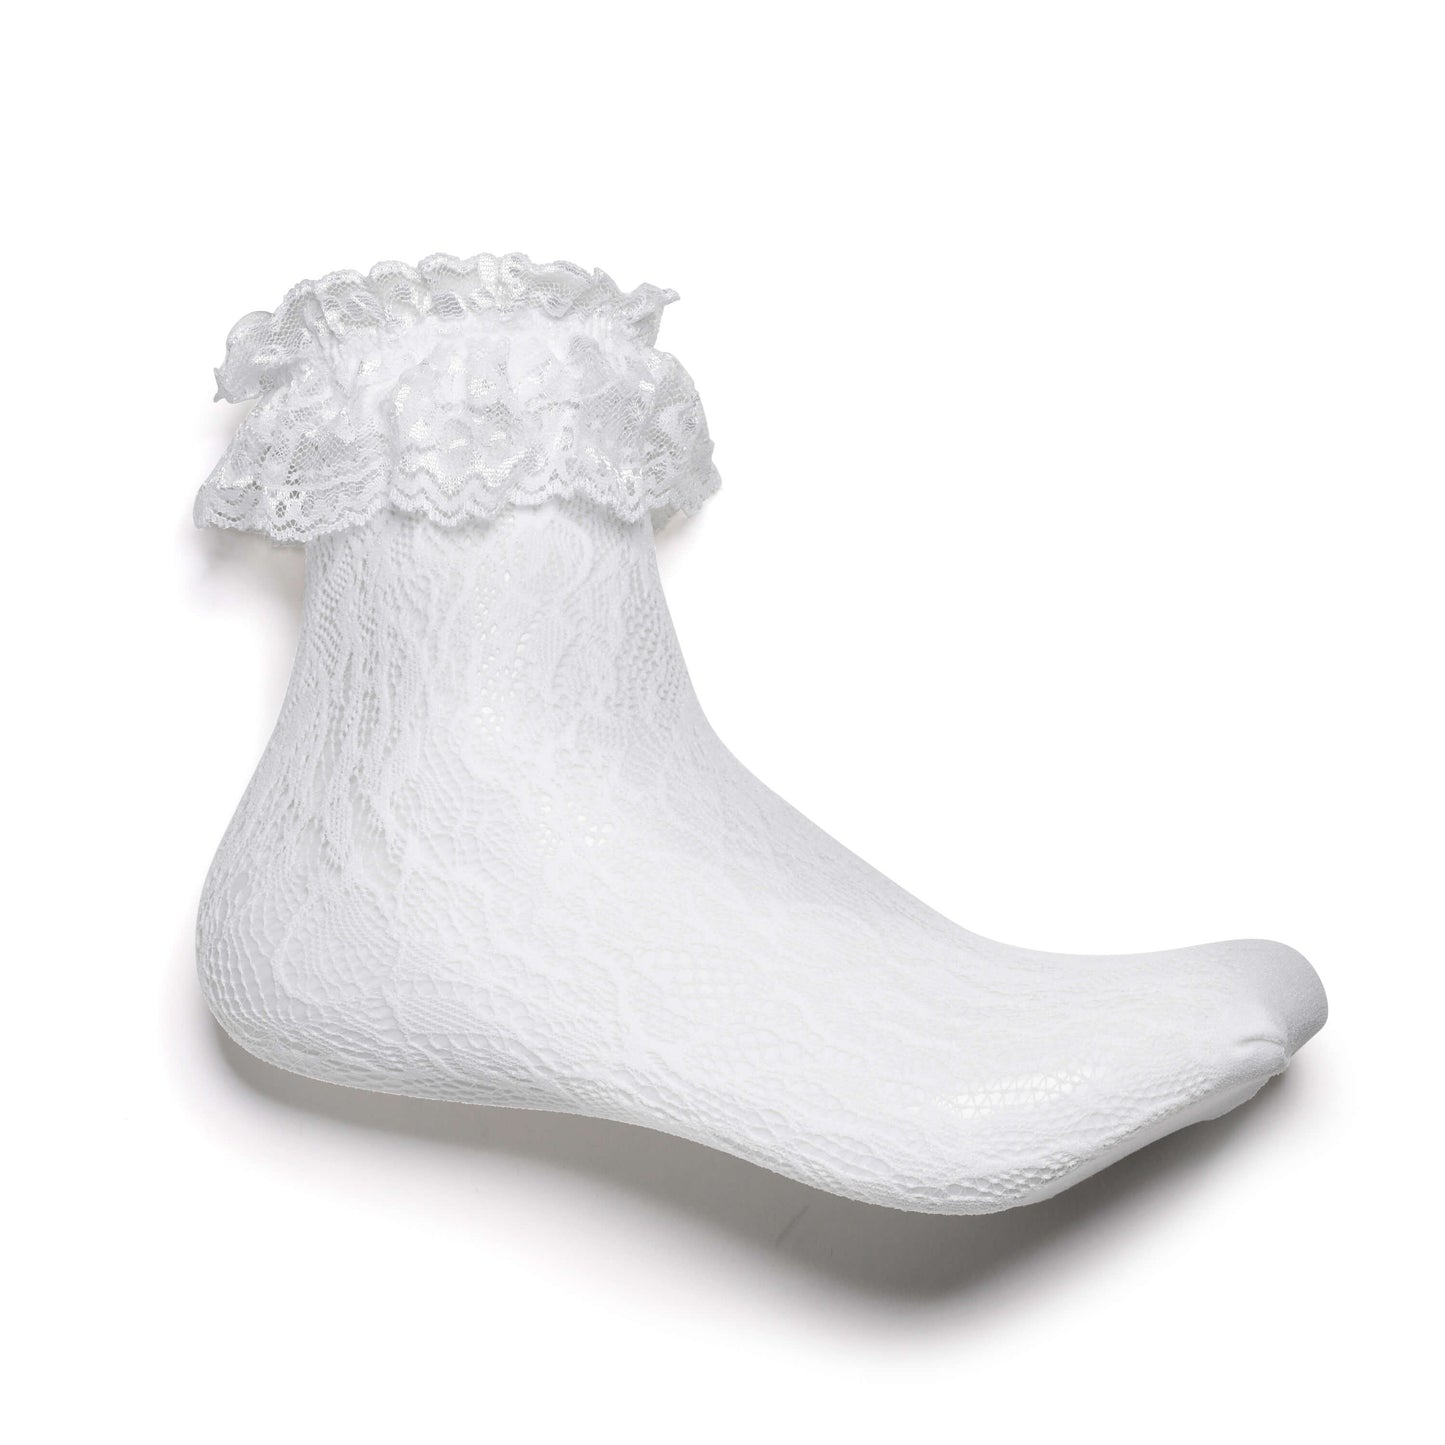 Heiress White Lace Ruffle Socks - Accessories - KOI Footwear - White - Side View